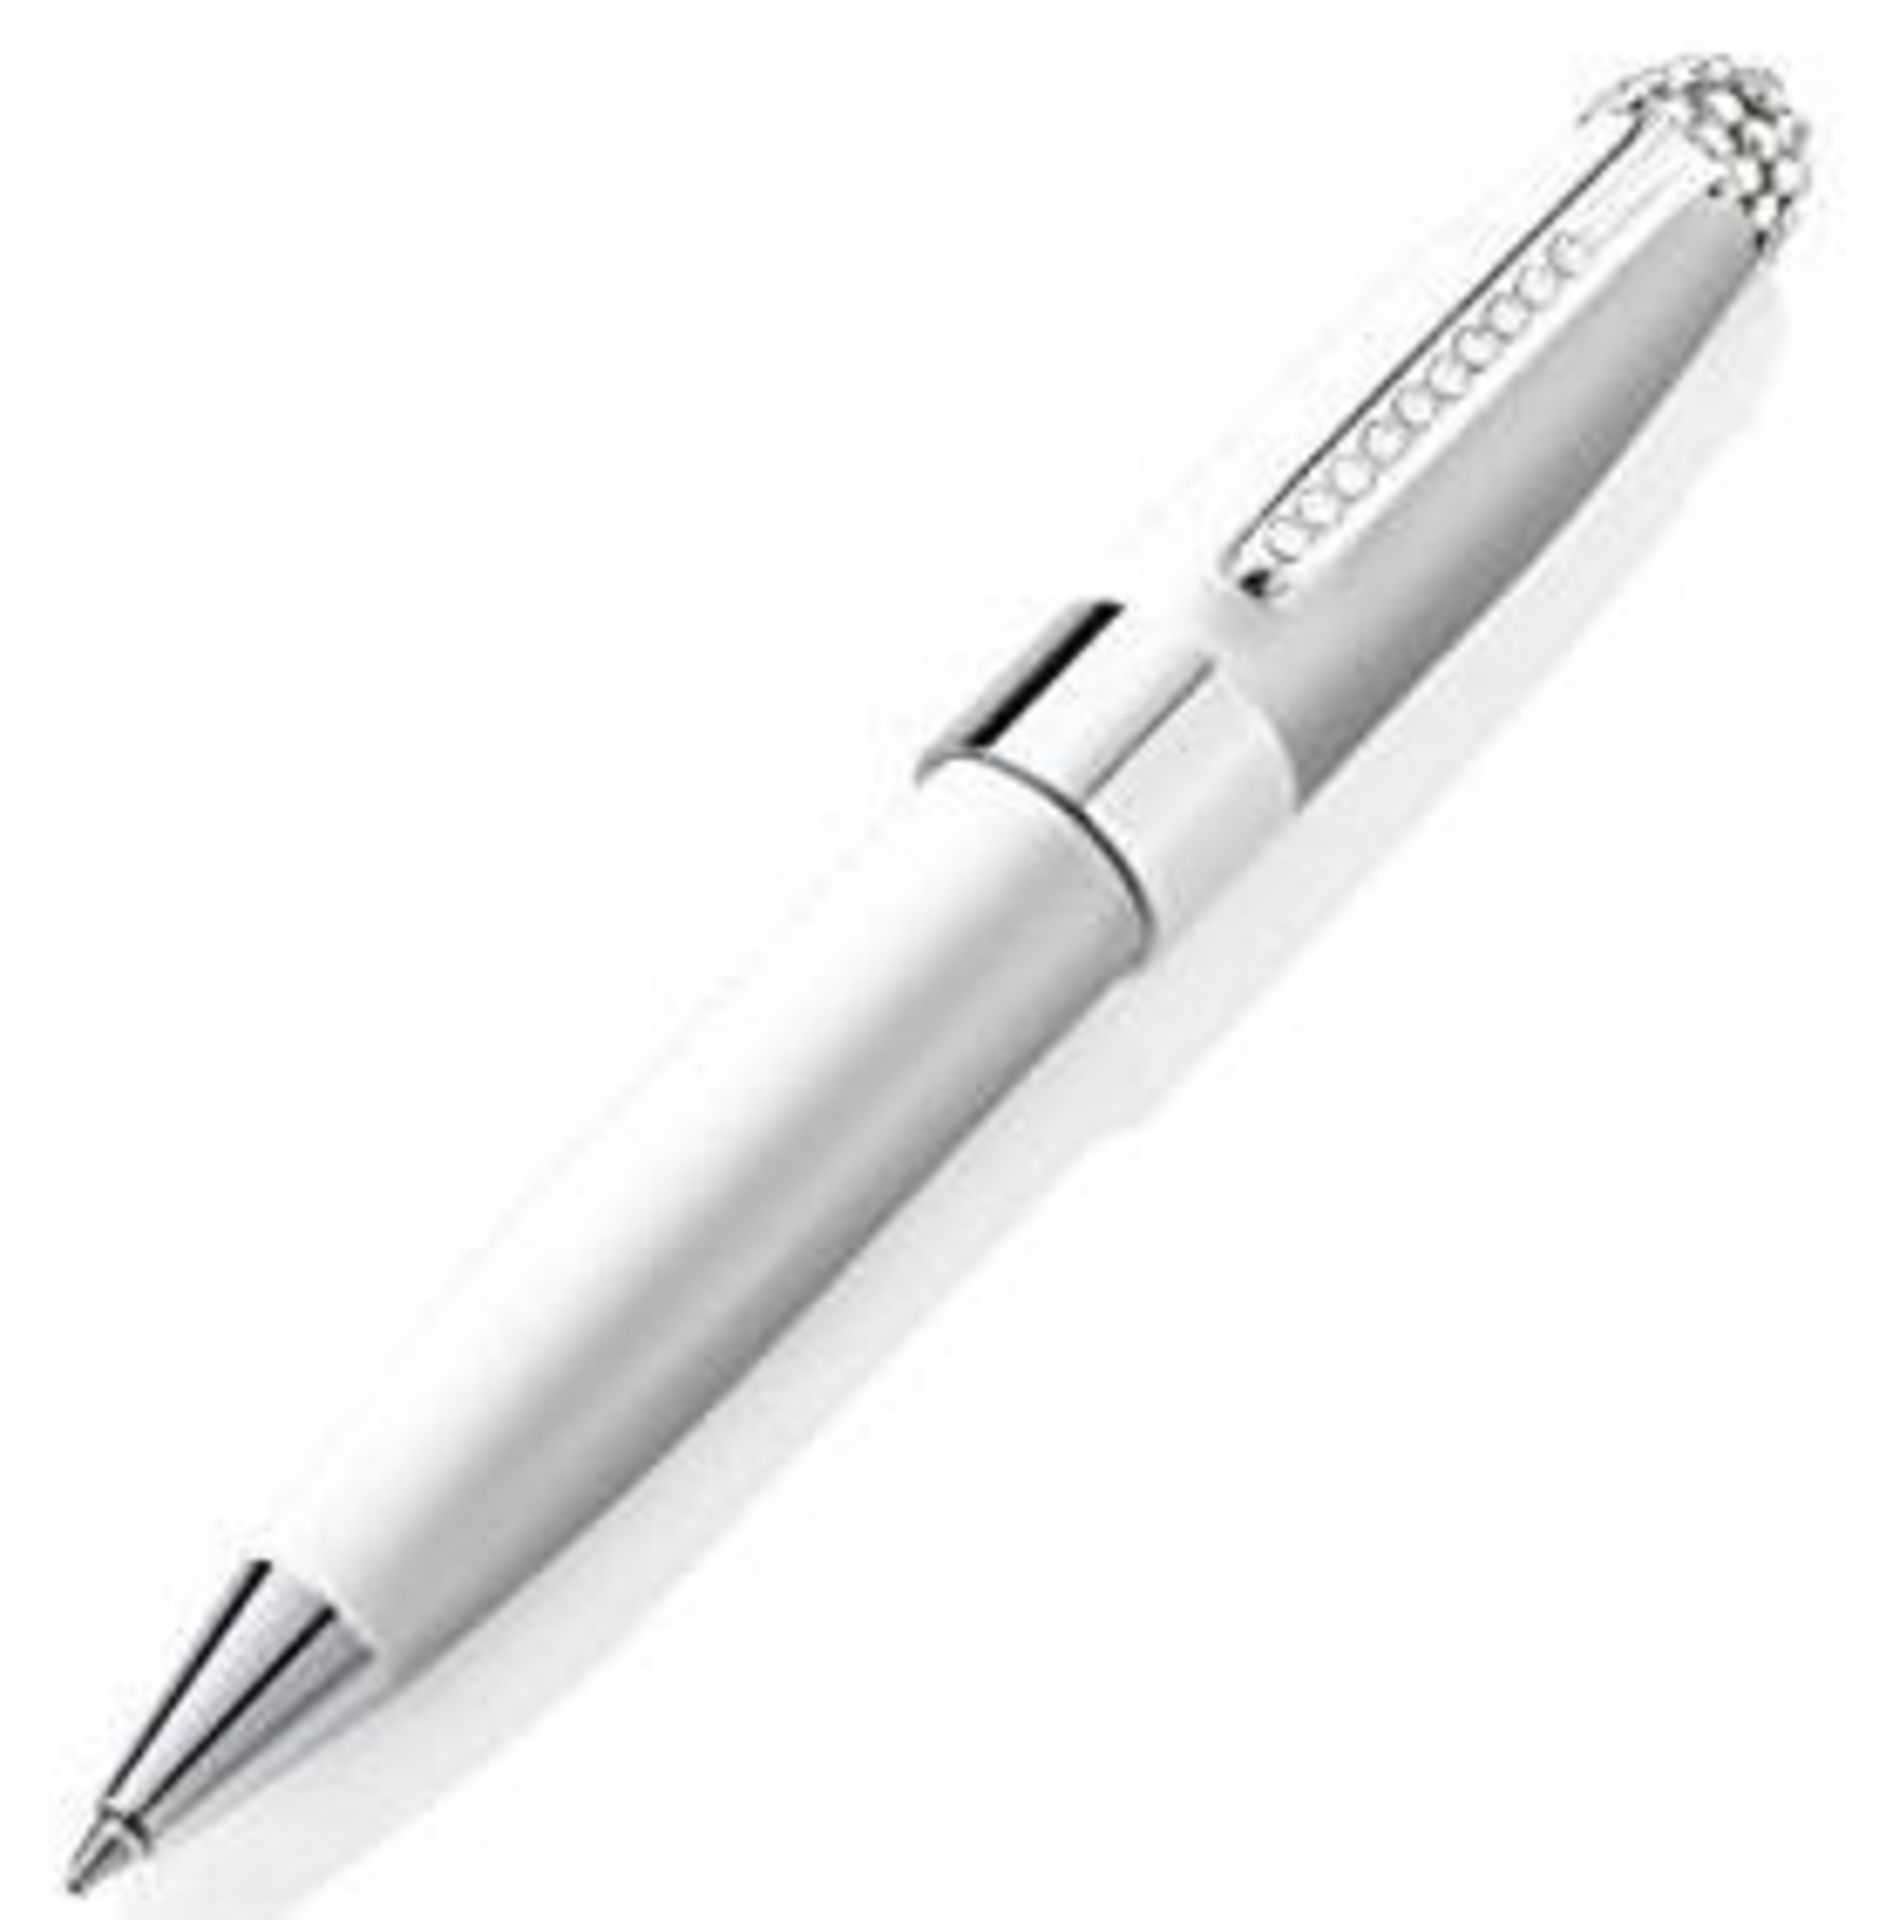 10 x ICE LONDON "Duchess" Ladies Pens - All Embellished With SWAROVSKI Crystals - Colour: White - Ne